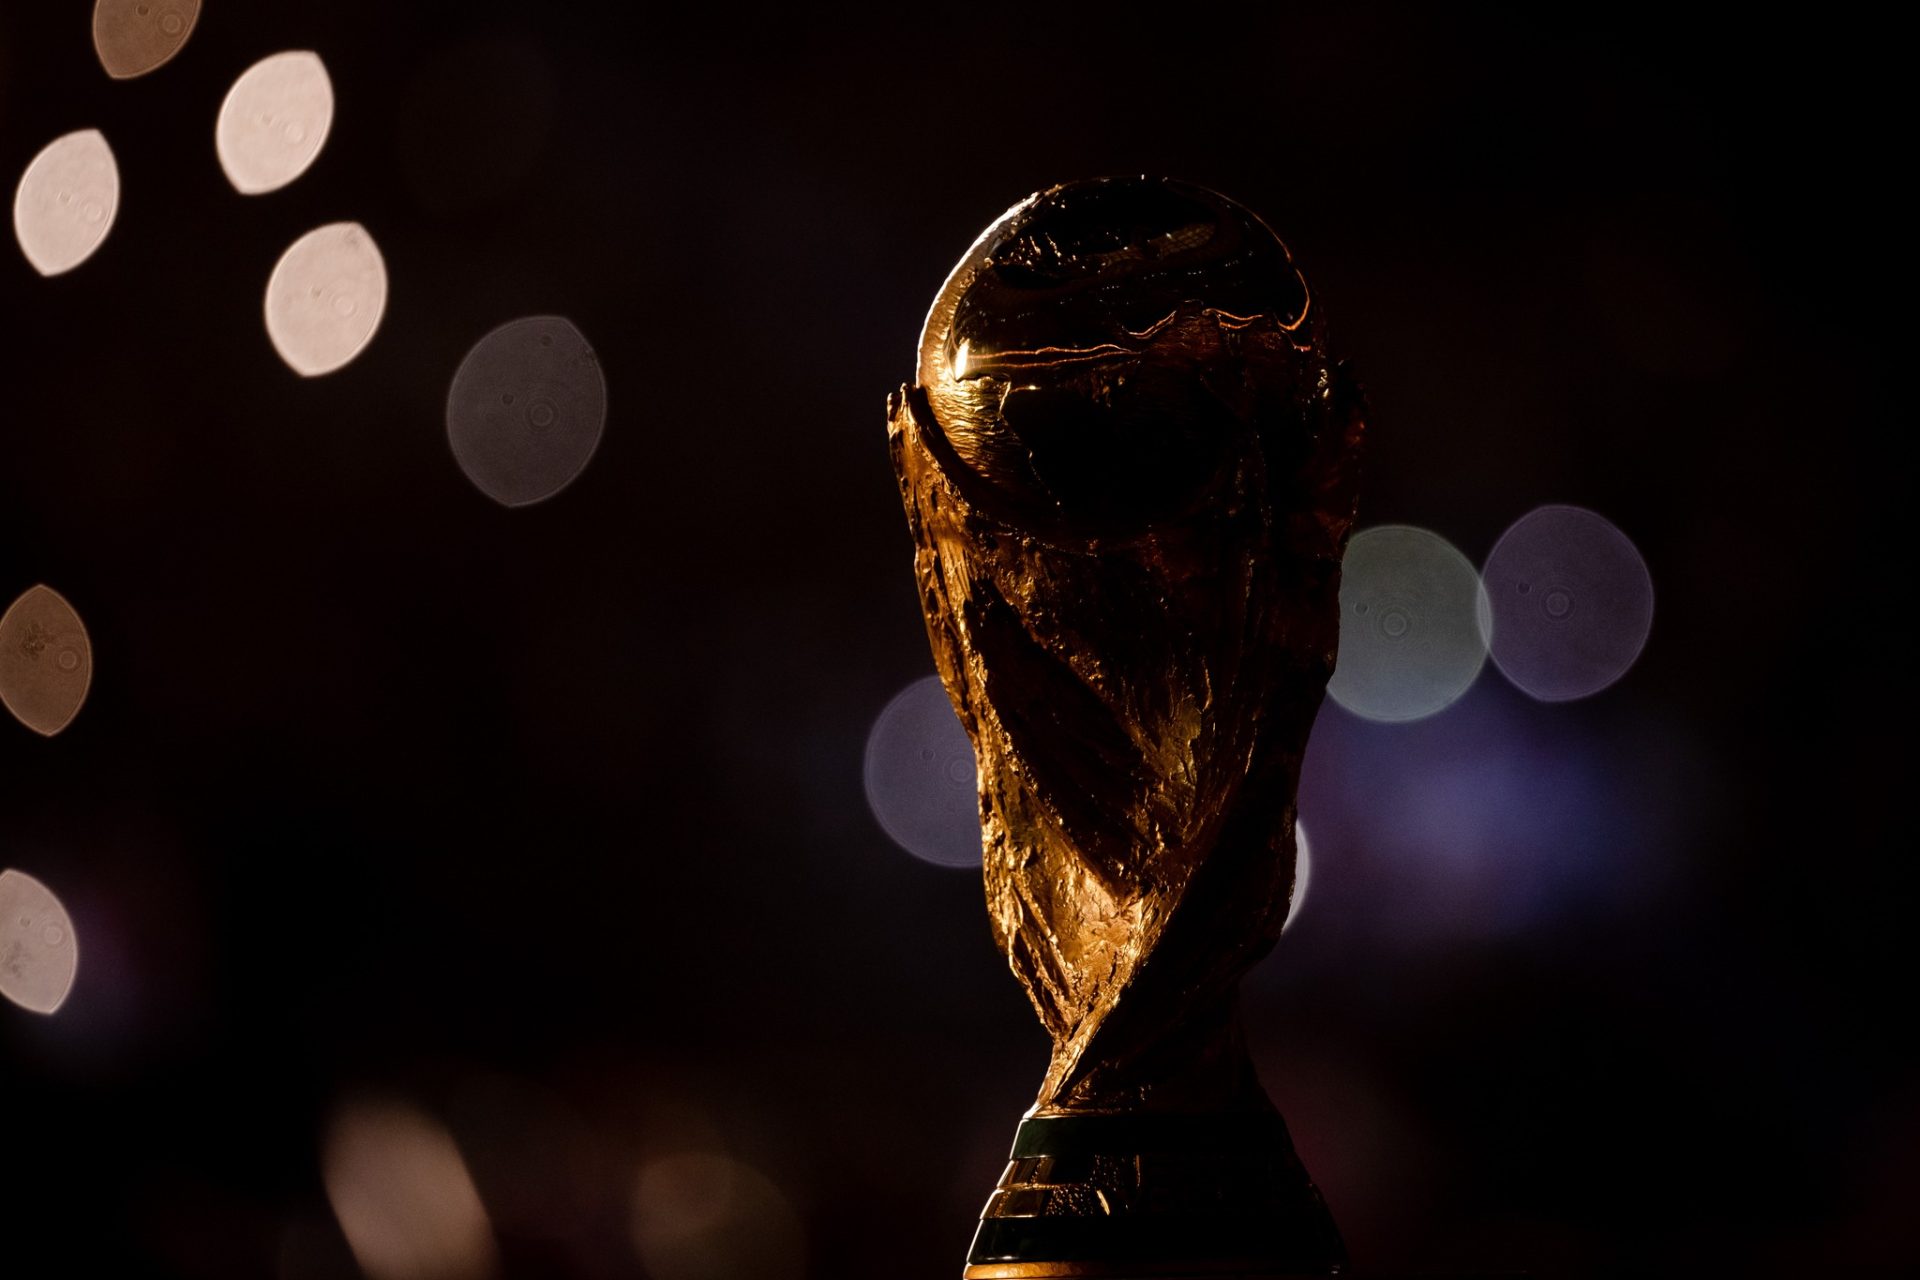 LUSAIL CITY, QATAR - DECEMBER 18: The FIFA World Cup trophy is seen prior to the FIFA World Cup Qatar 2022 Final match between Argentina and France at Lusail Stadium on December 18, 2022 in Lusail City, Qatar. (Photo by Marvin Ibo Guengoer - GES Sportfoto/Getty Images)